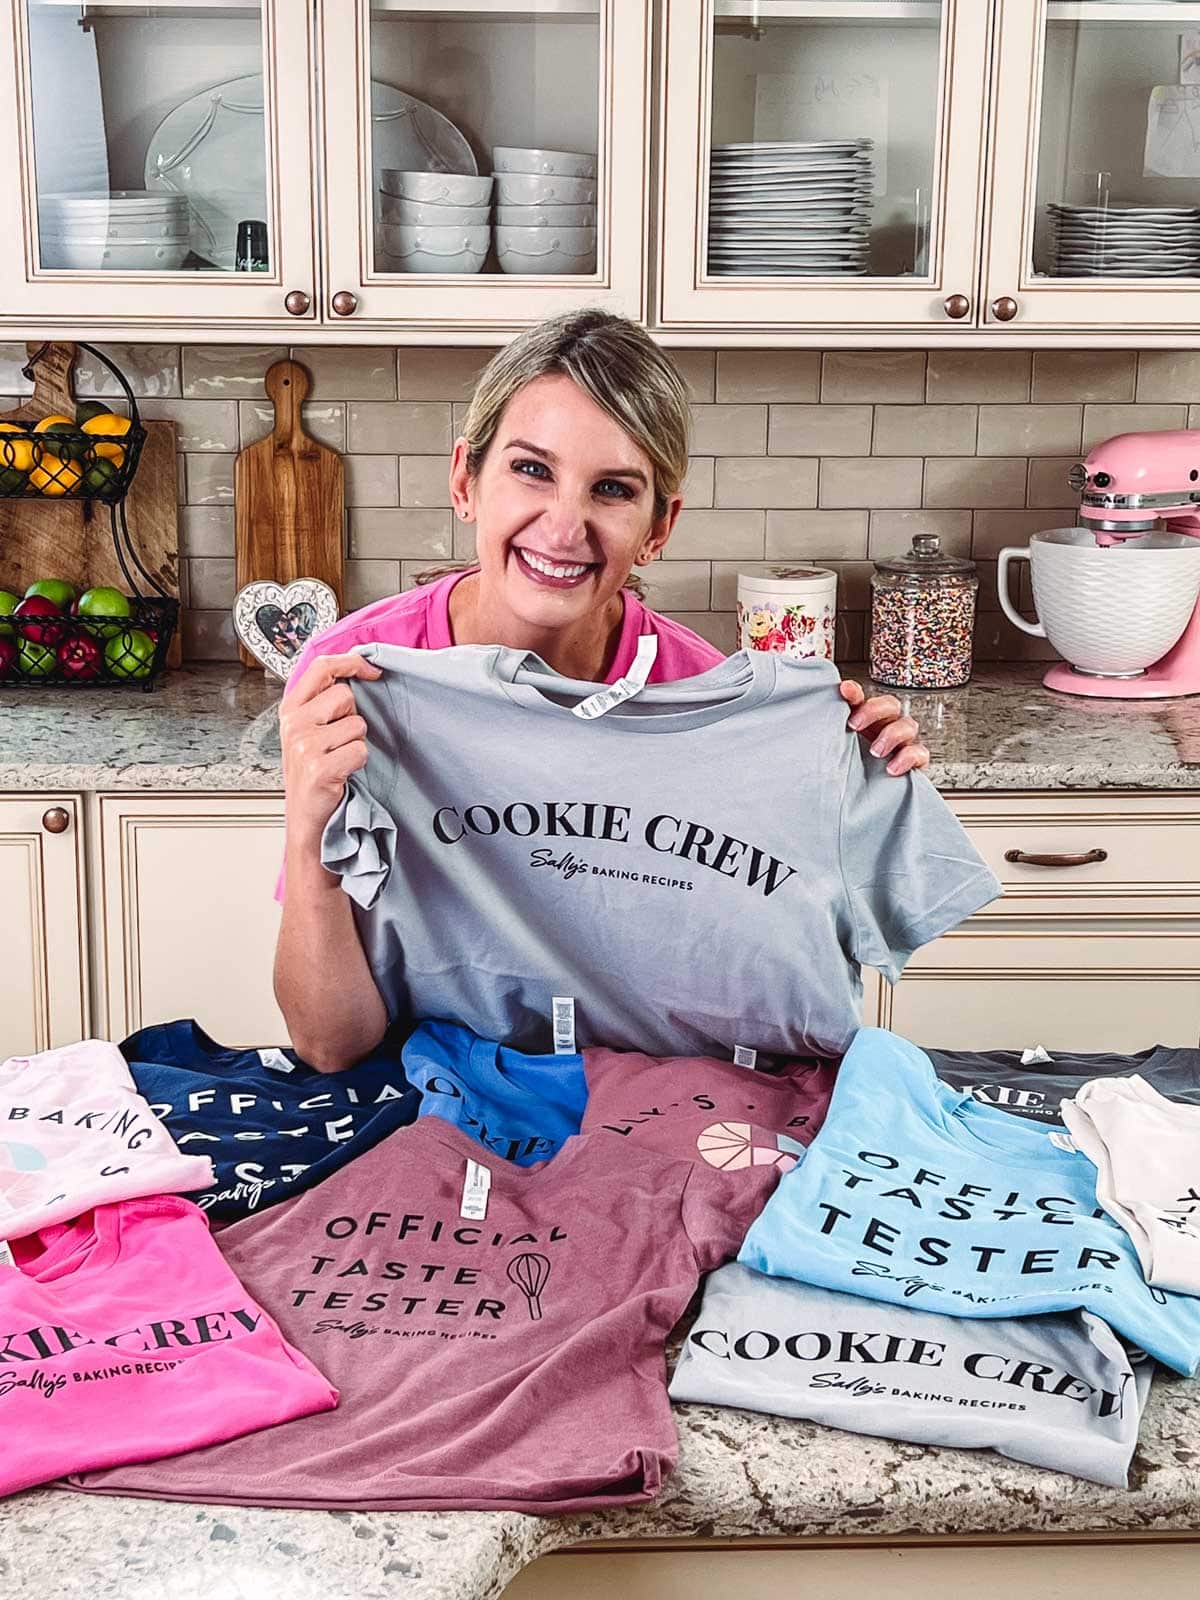 Sally with colorful Sally's Baking Recipes shirts.